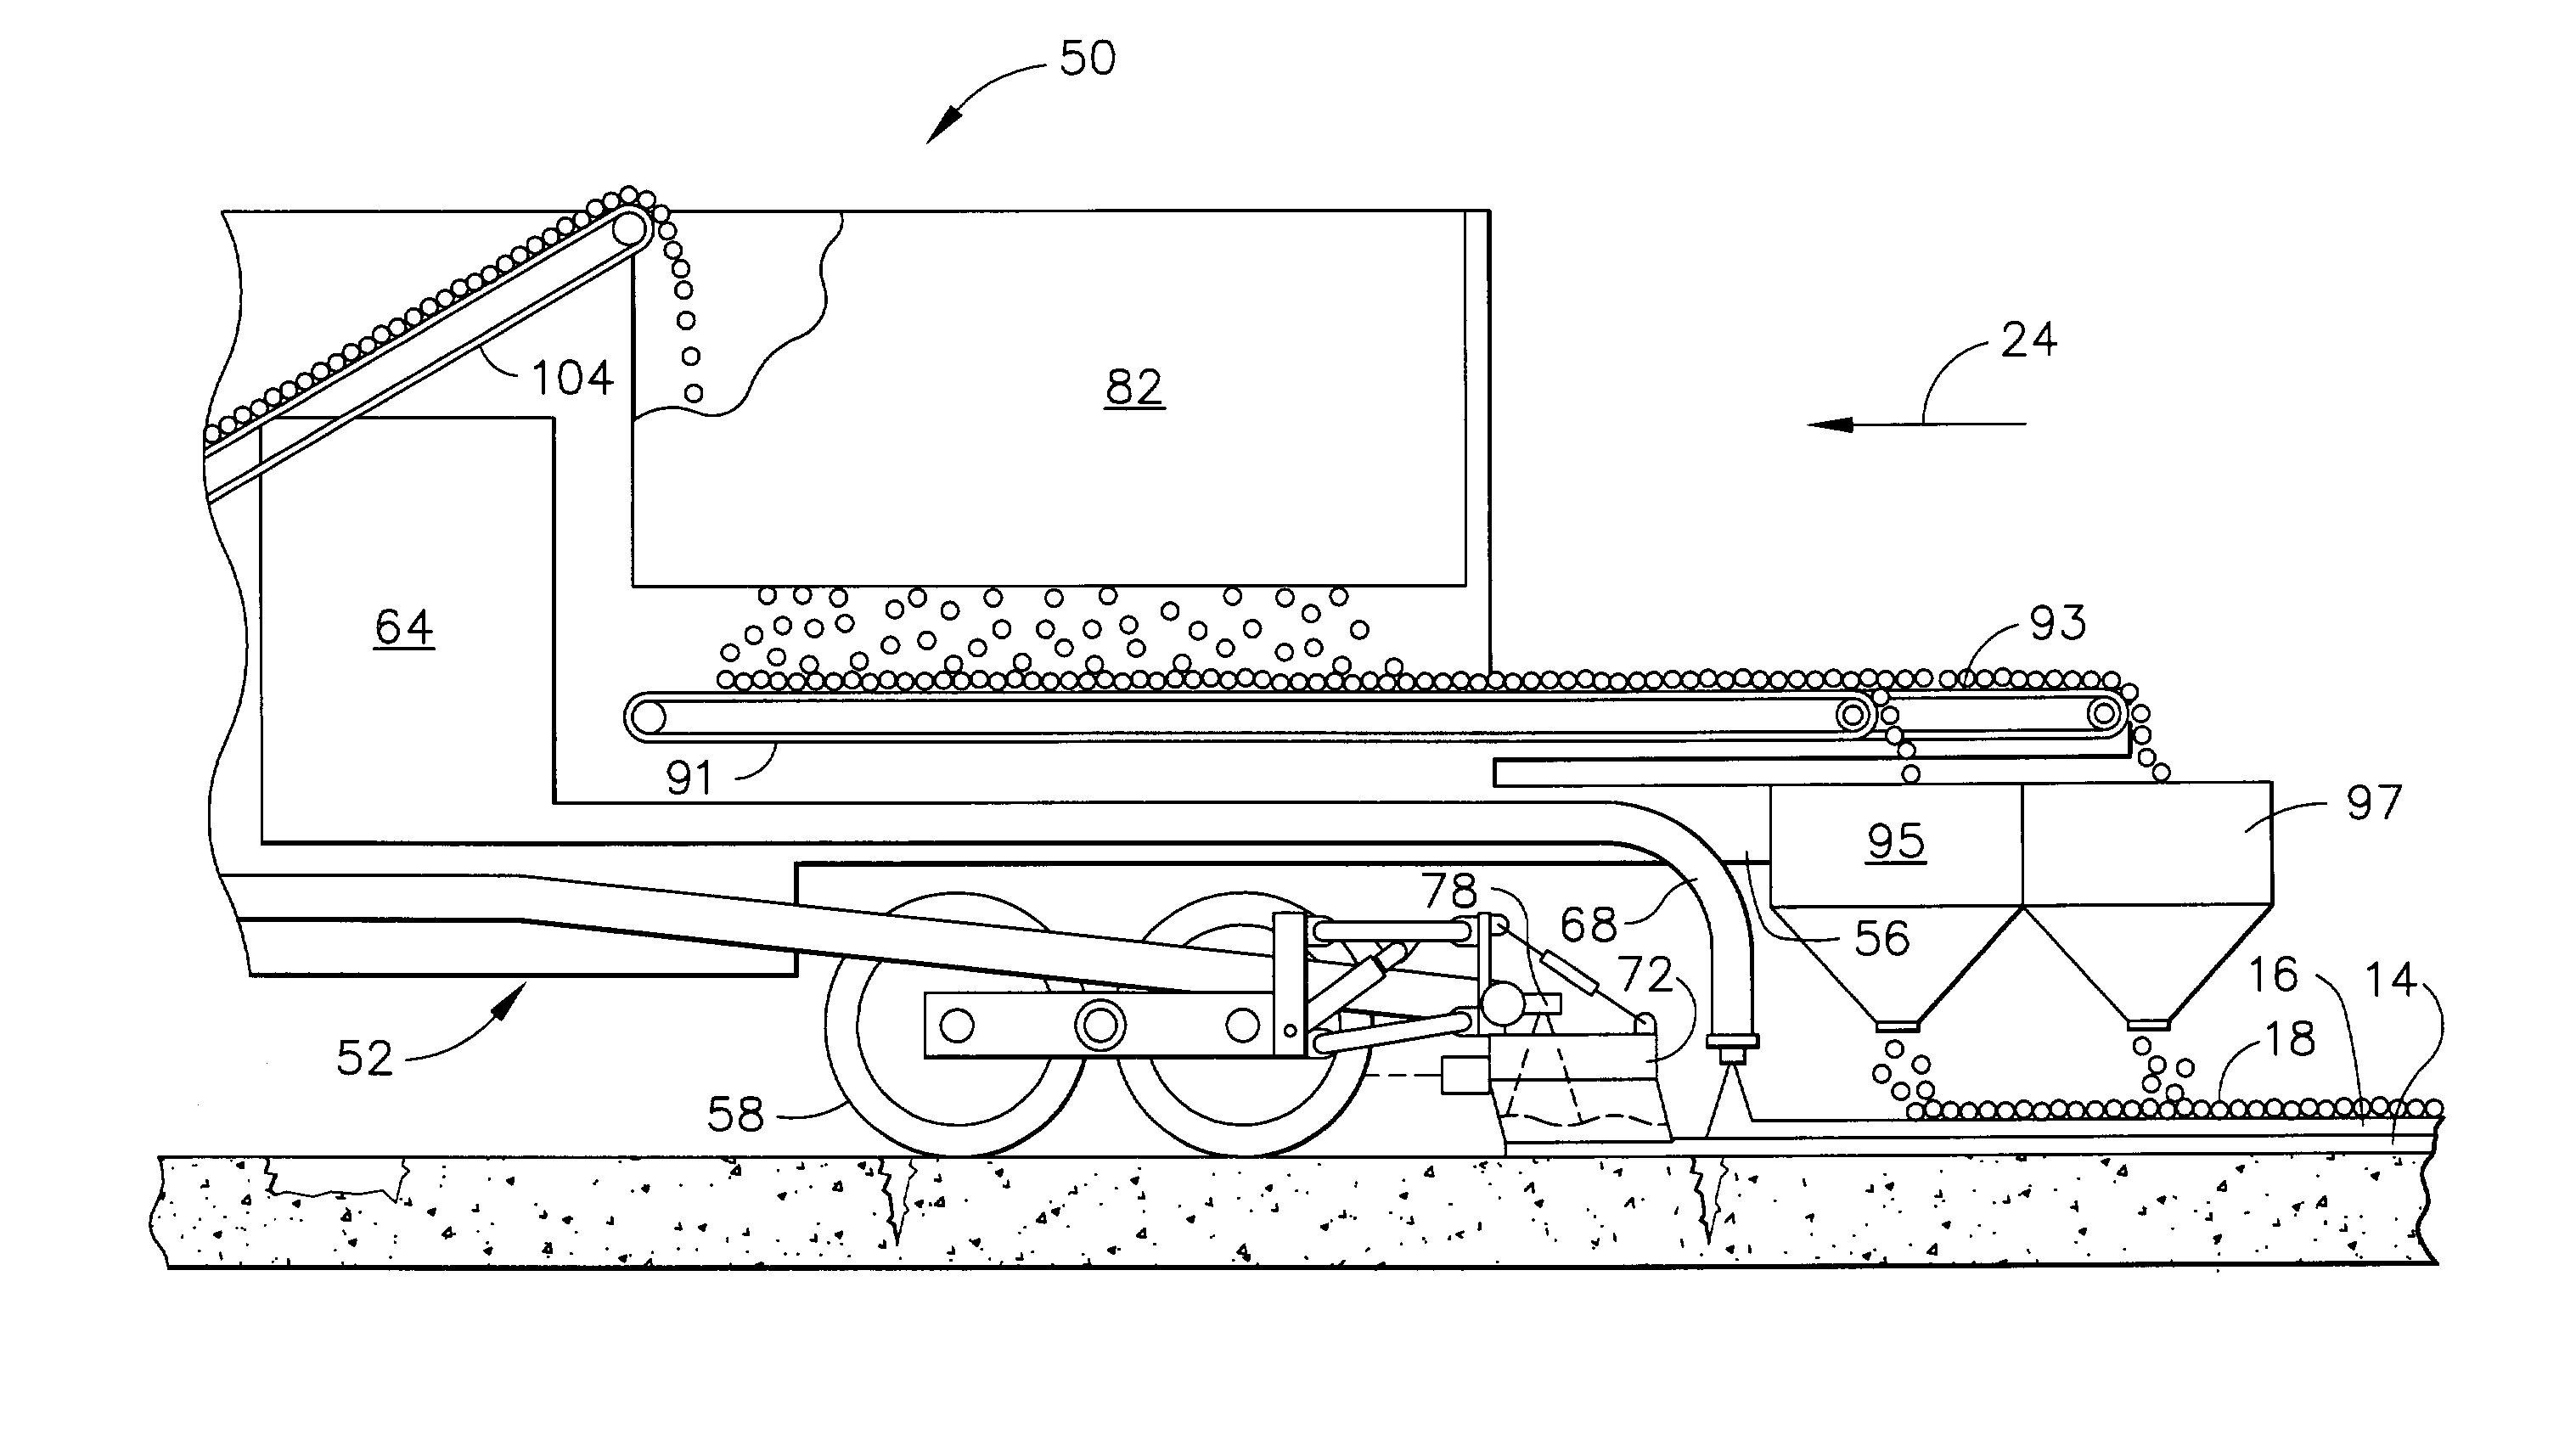 Apparatus for treating a pavement surface